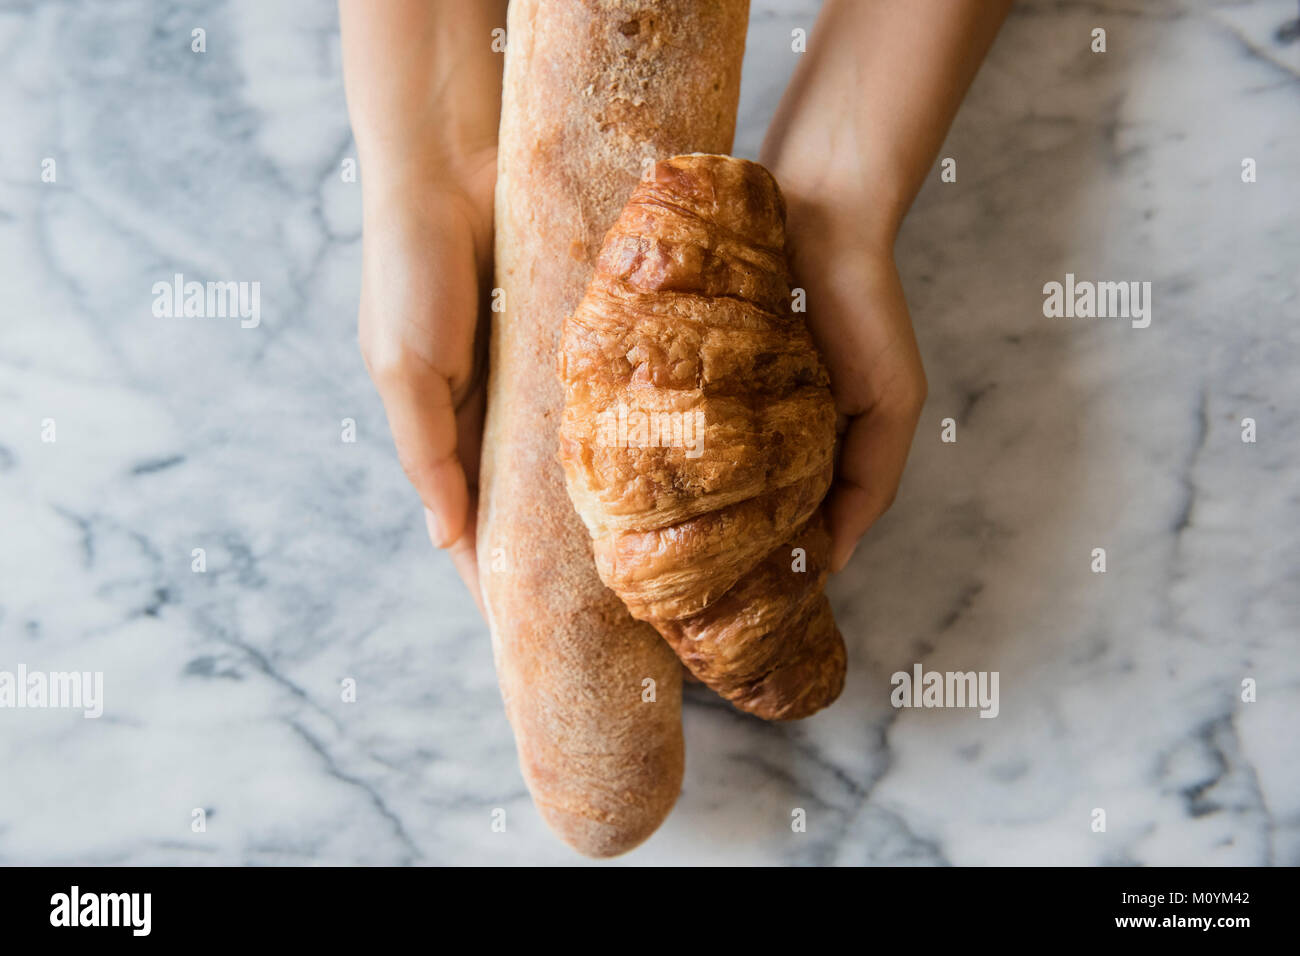 Hands of African American woman holding bread Stock Photo